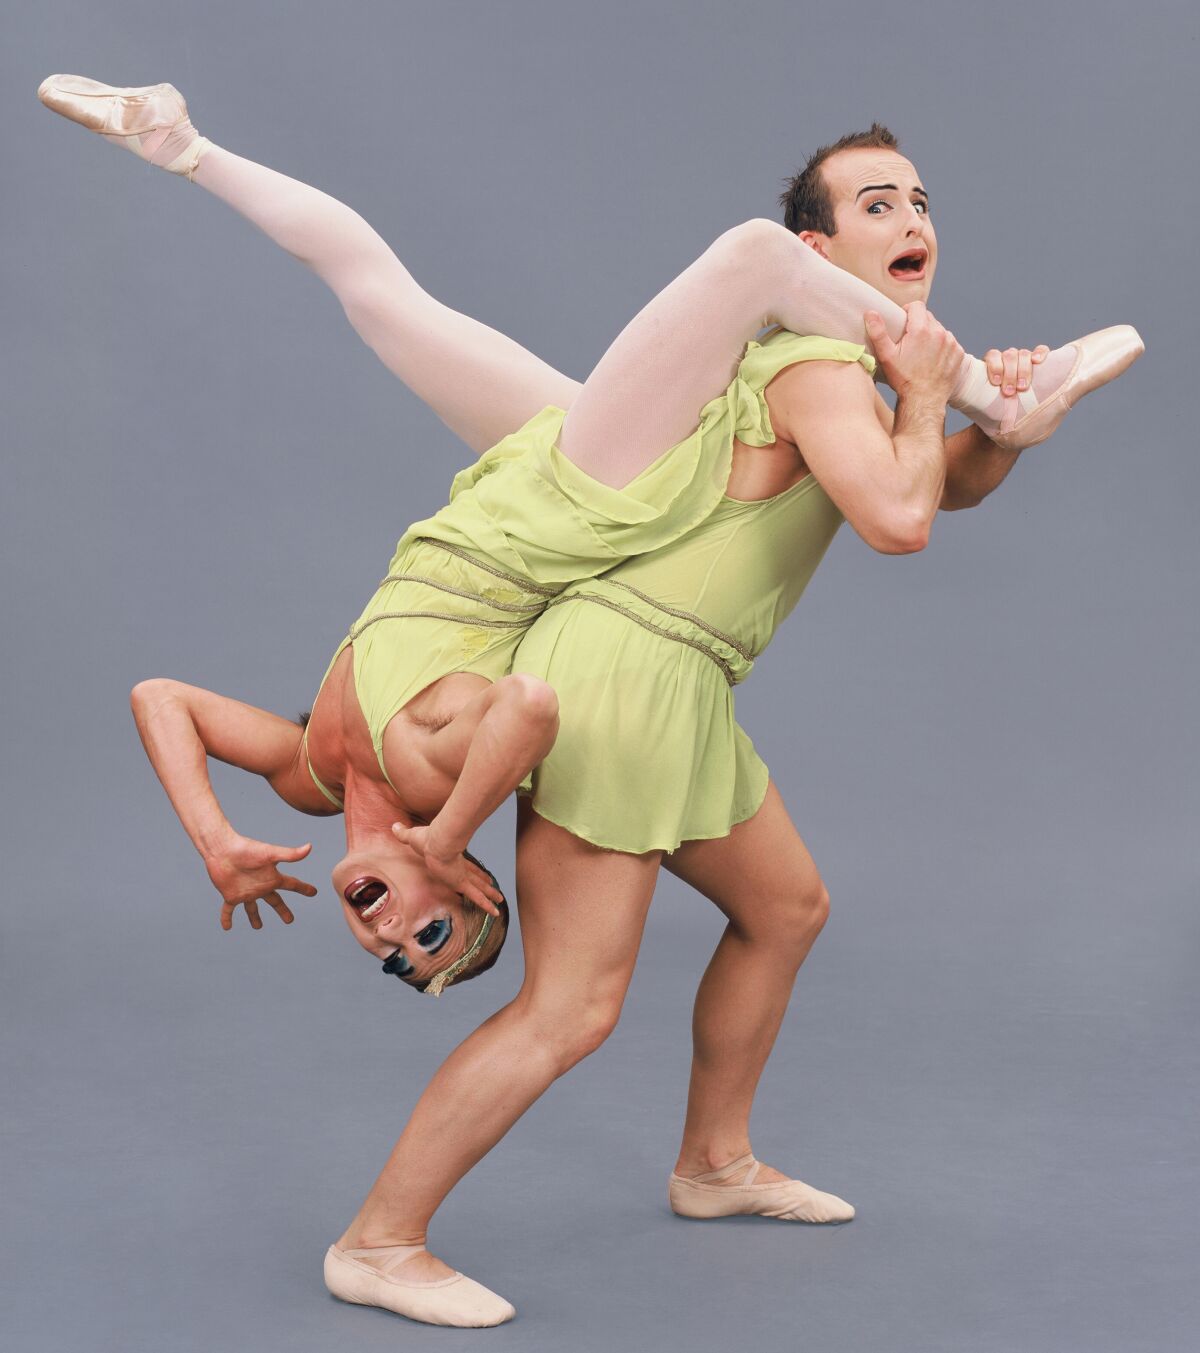 One male ballet dancer carries another by the leg over his shoulder